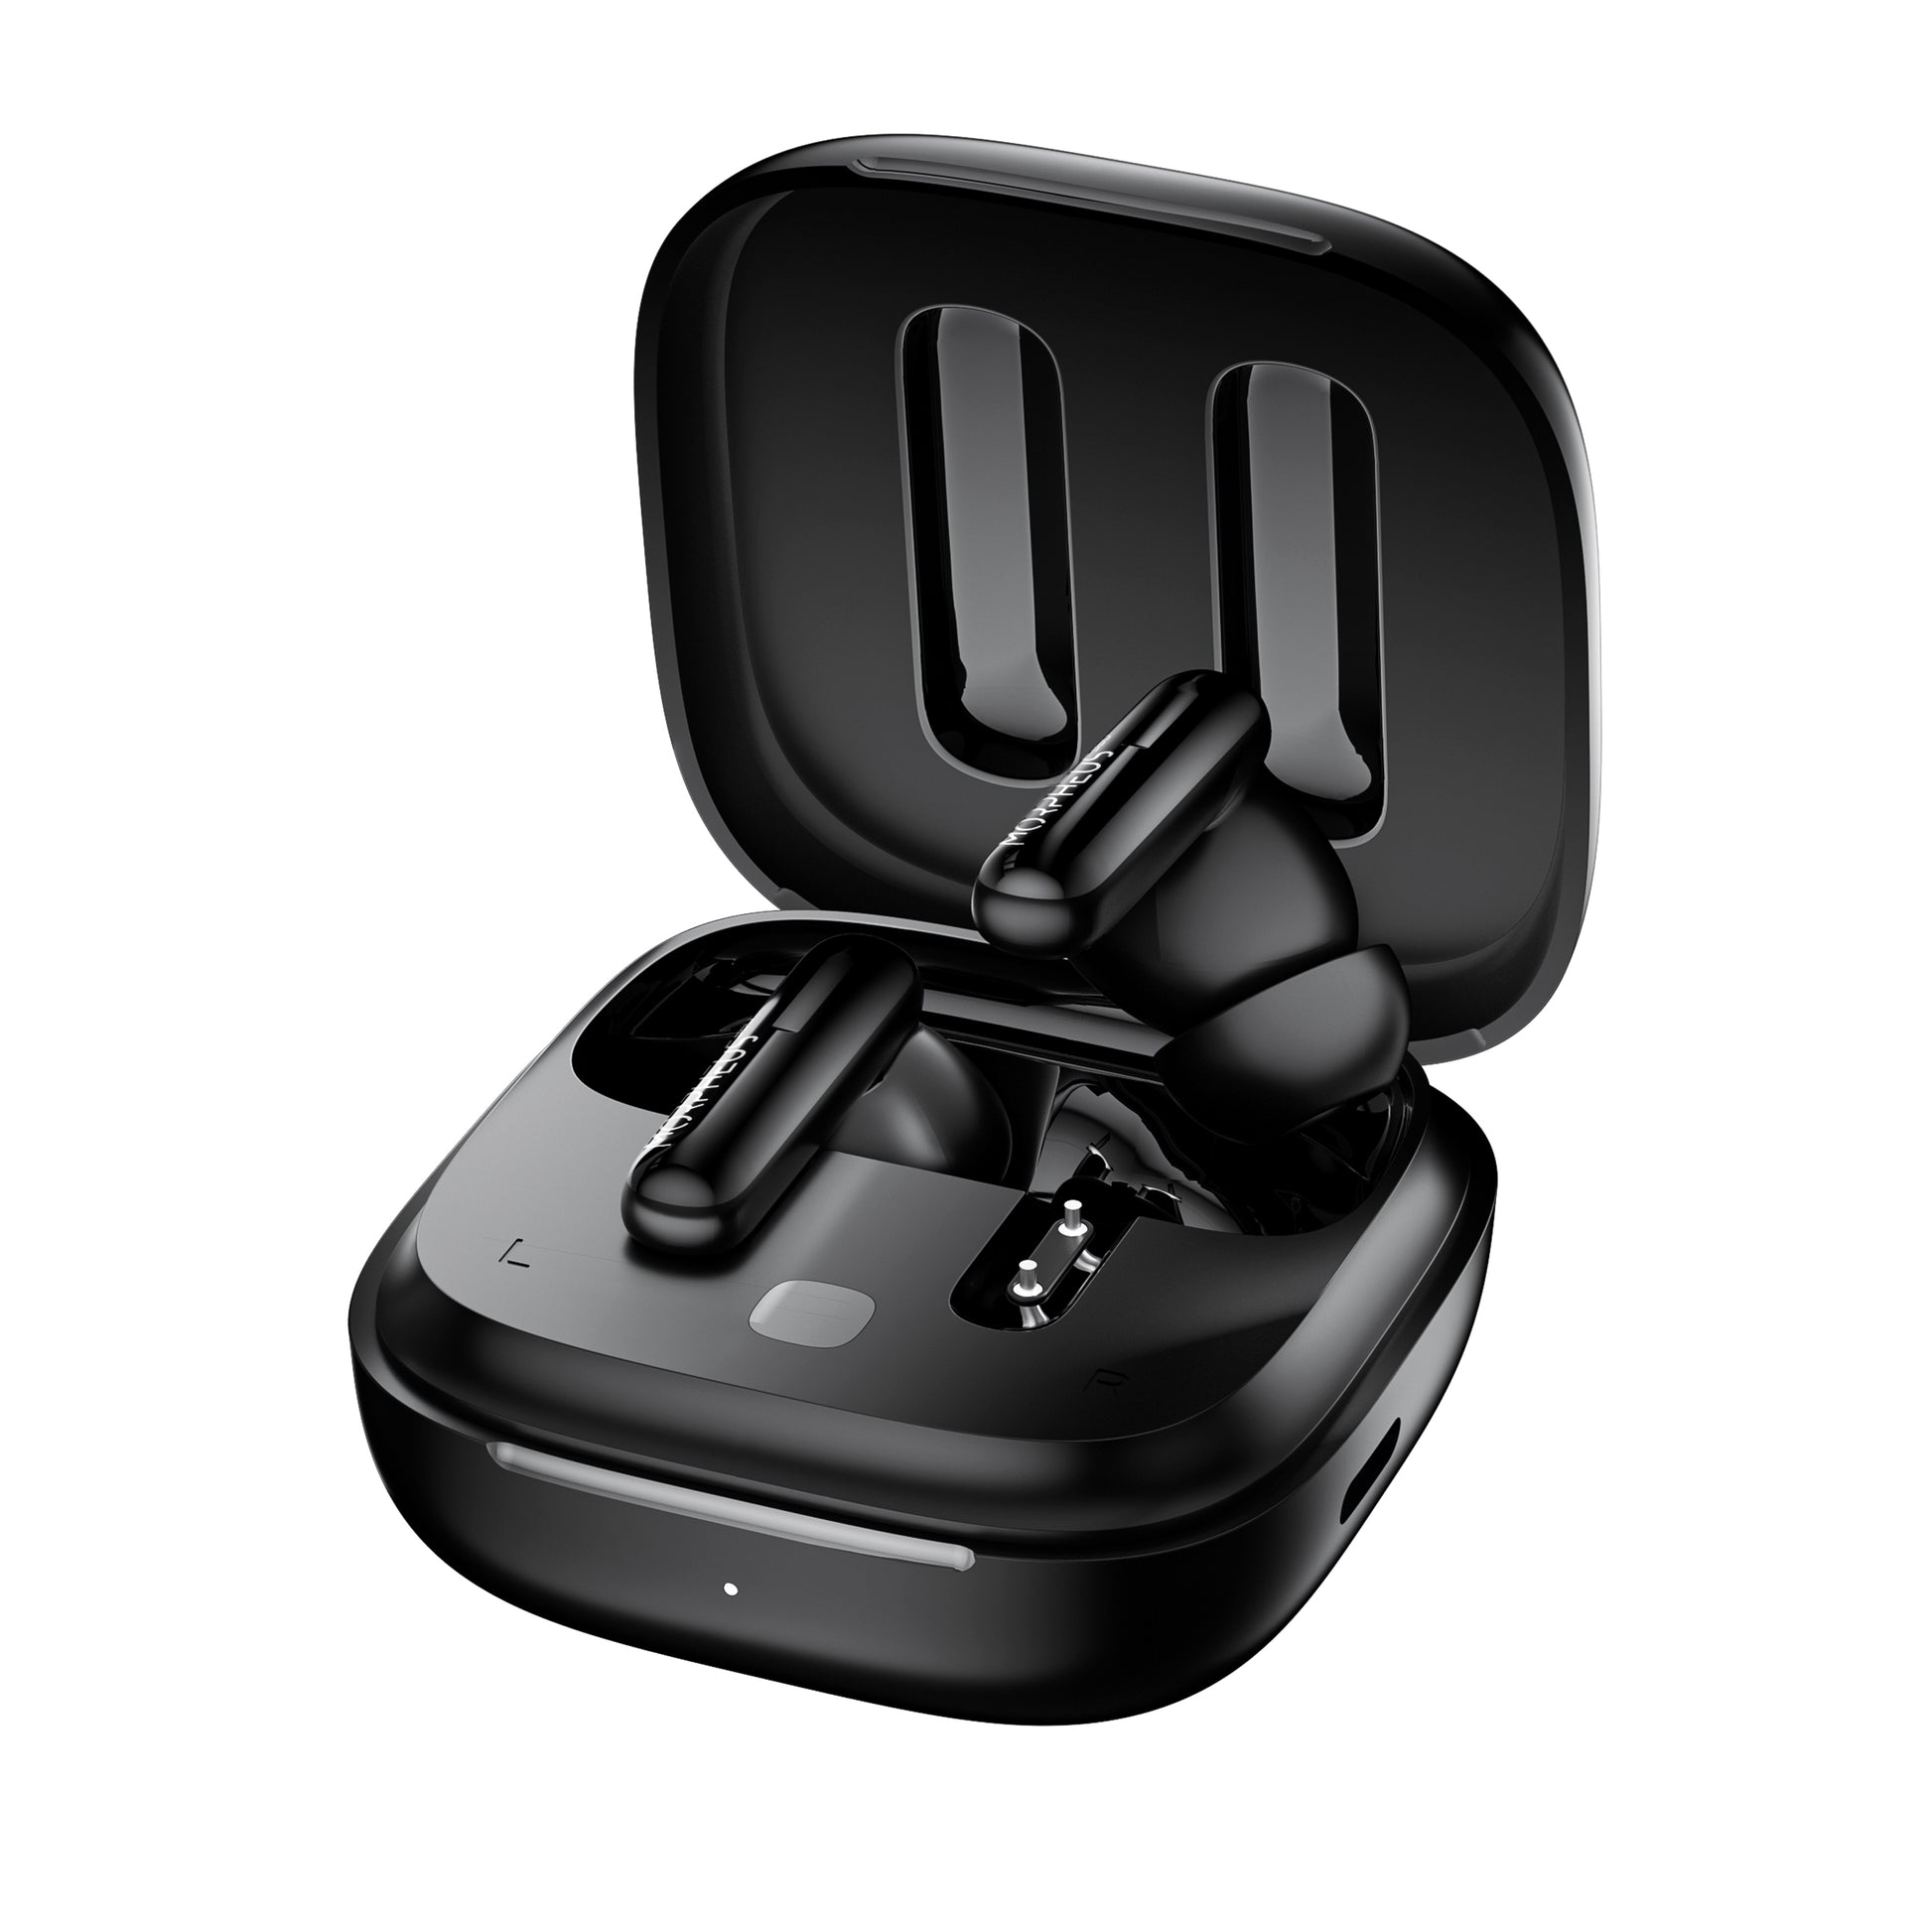 Photo of Morpheus 360 Nemesis ANC True Wireless Earbuds, front view with charging case open, the right black stick earbud is lifted from the charging case while the left earbud is resting in charging case